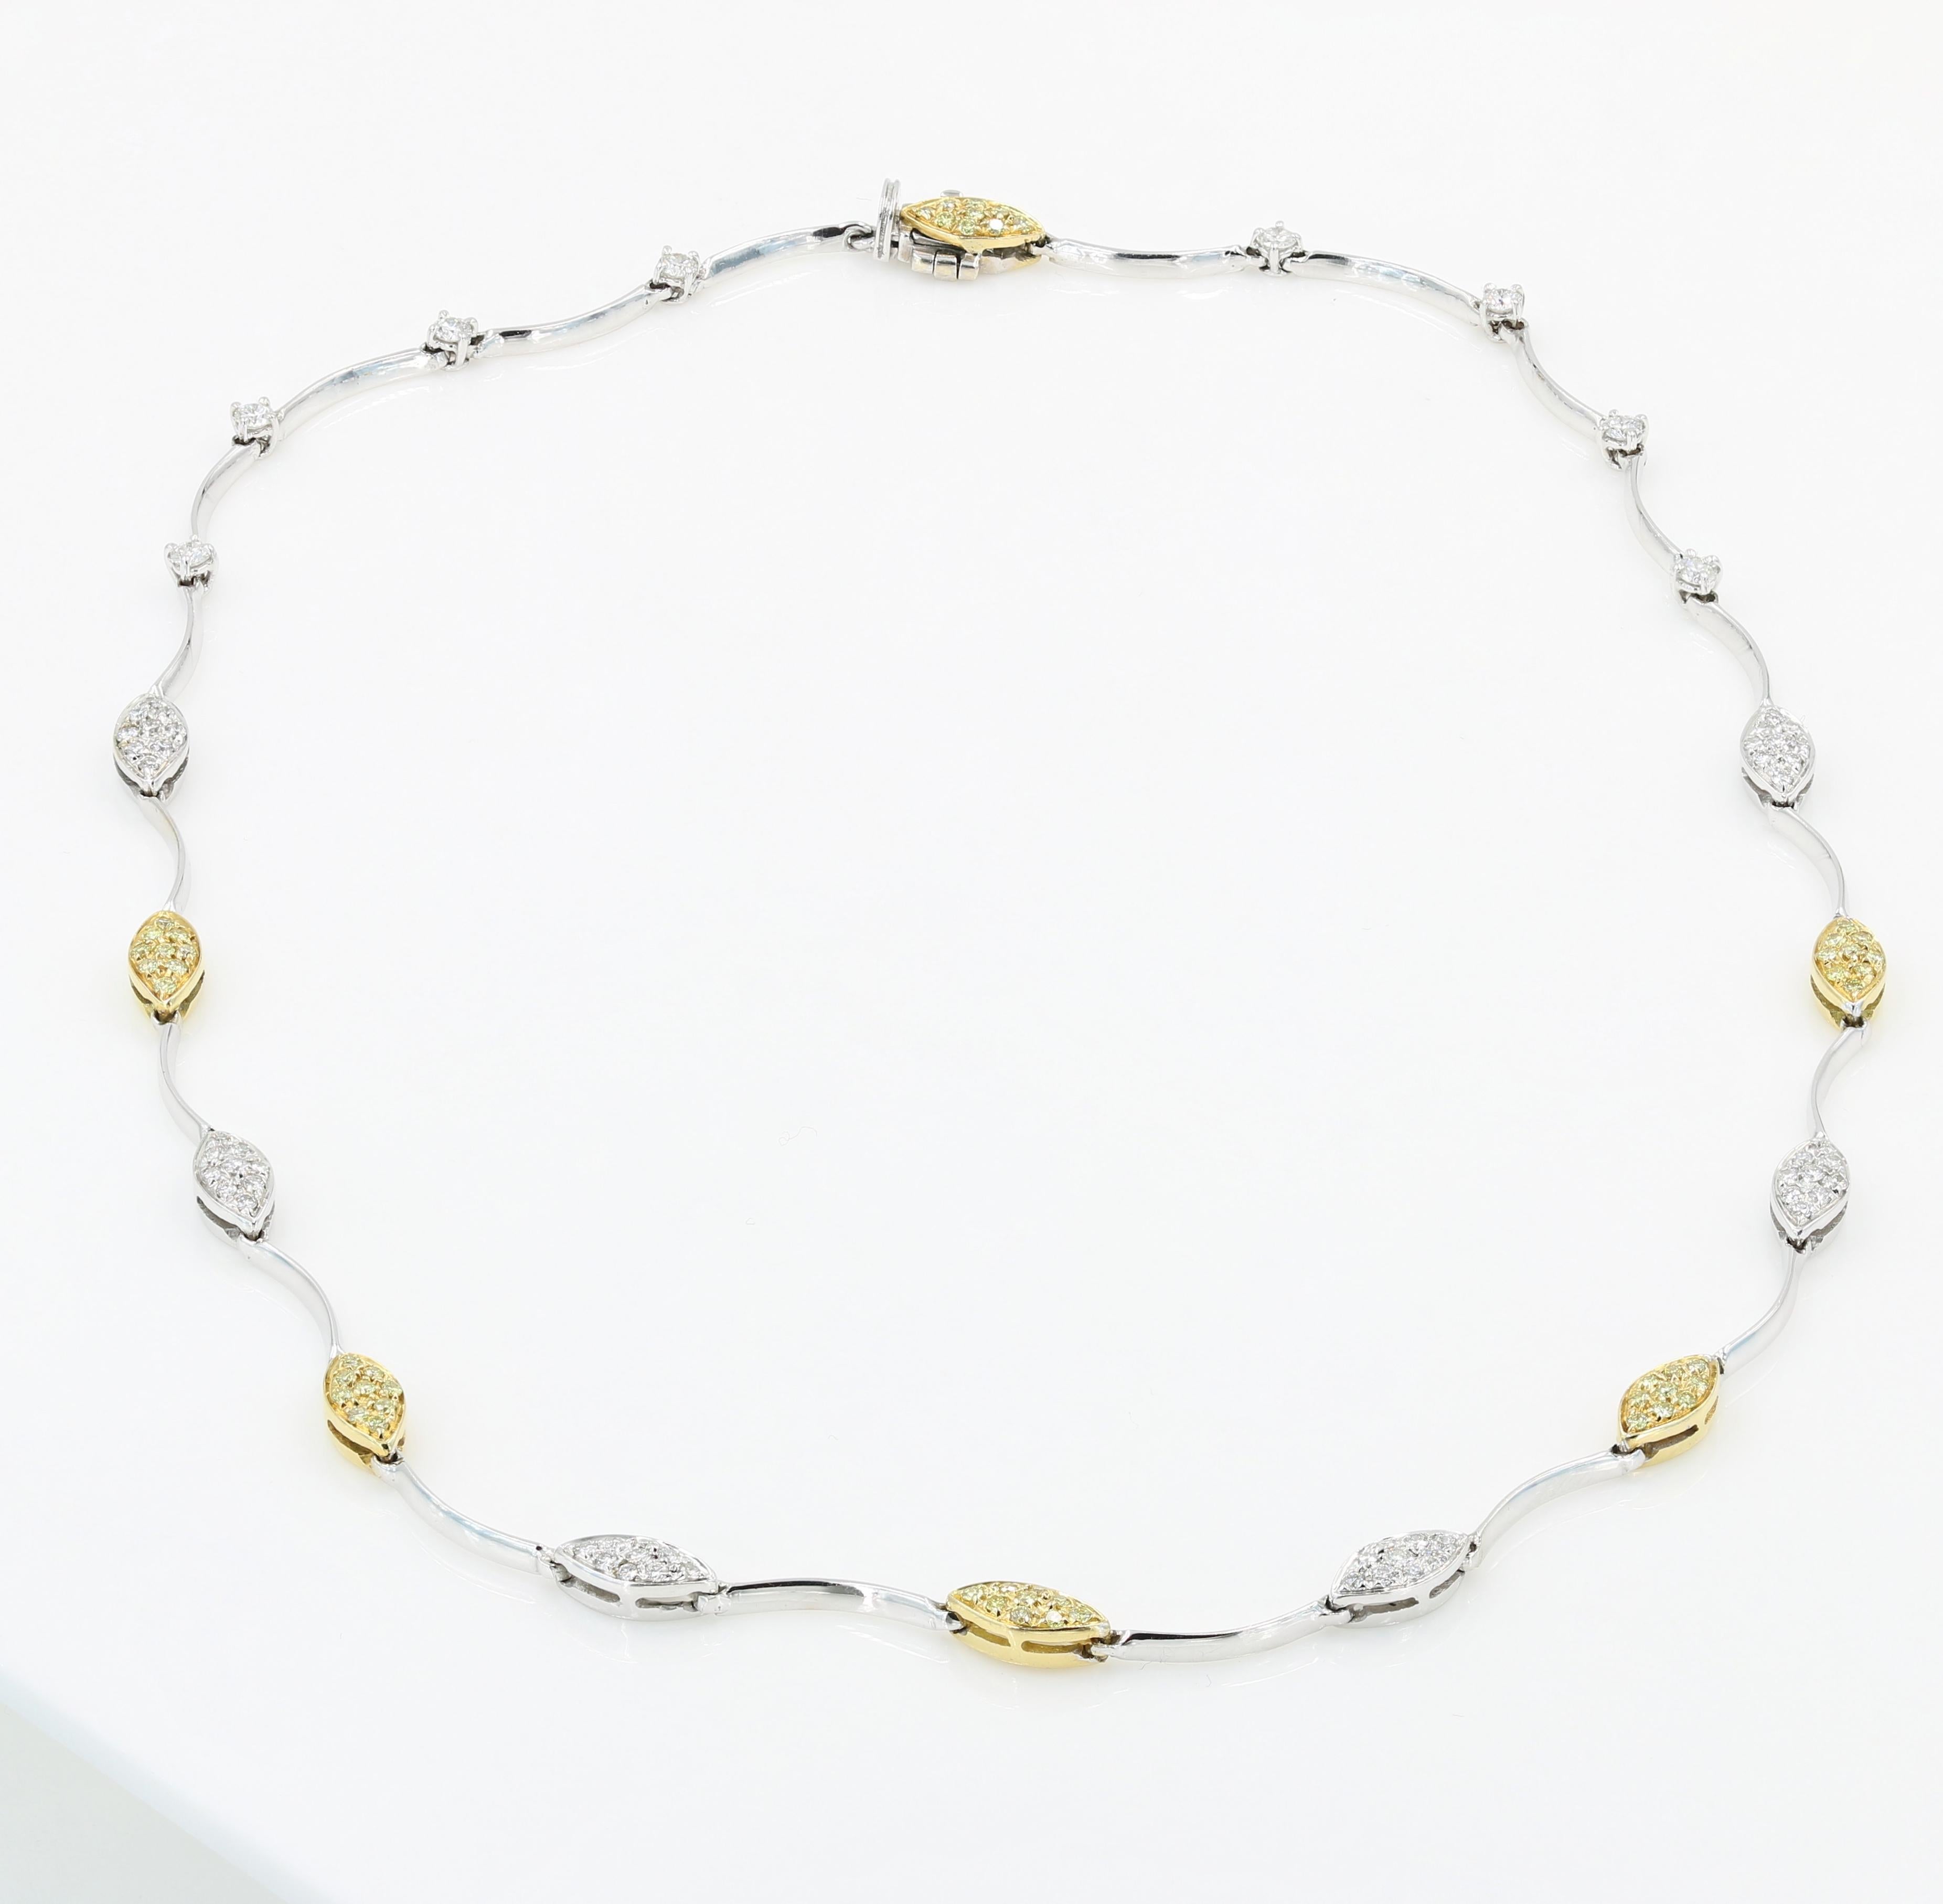 Contemporary Italian 18kt White and Yellow Gold Necklace with Natural Yellow & White Diamonds